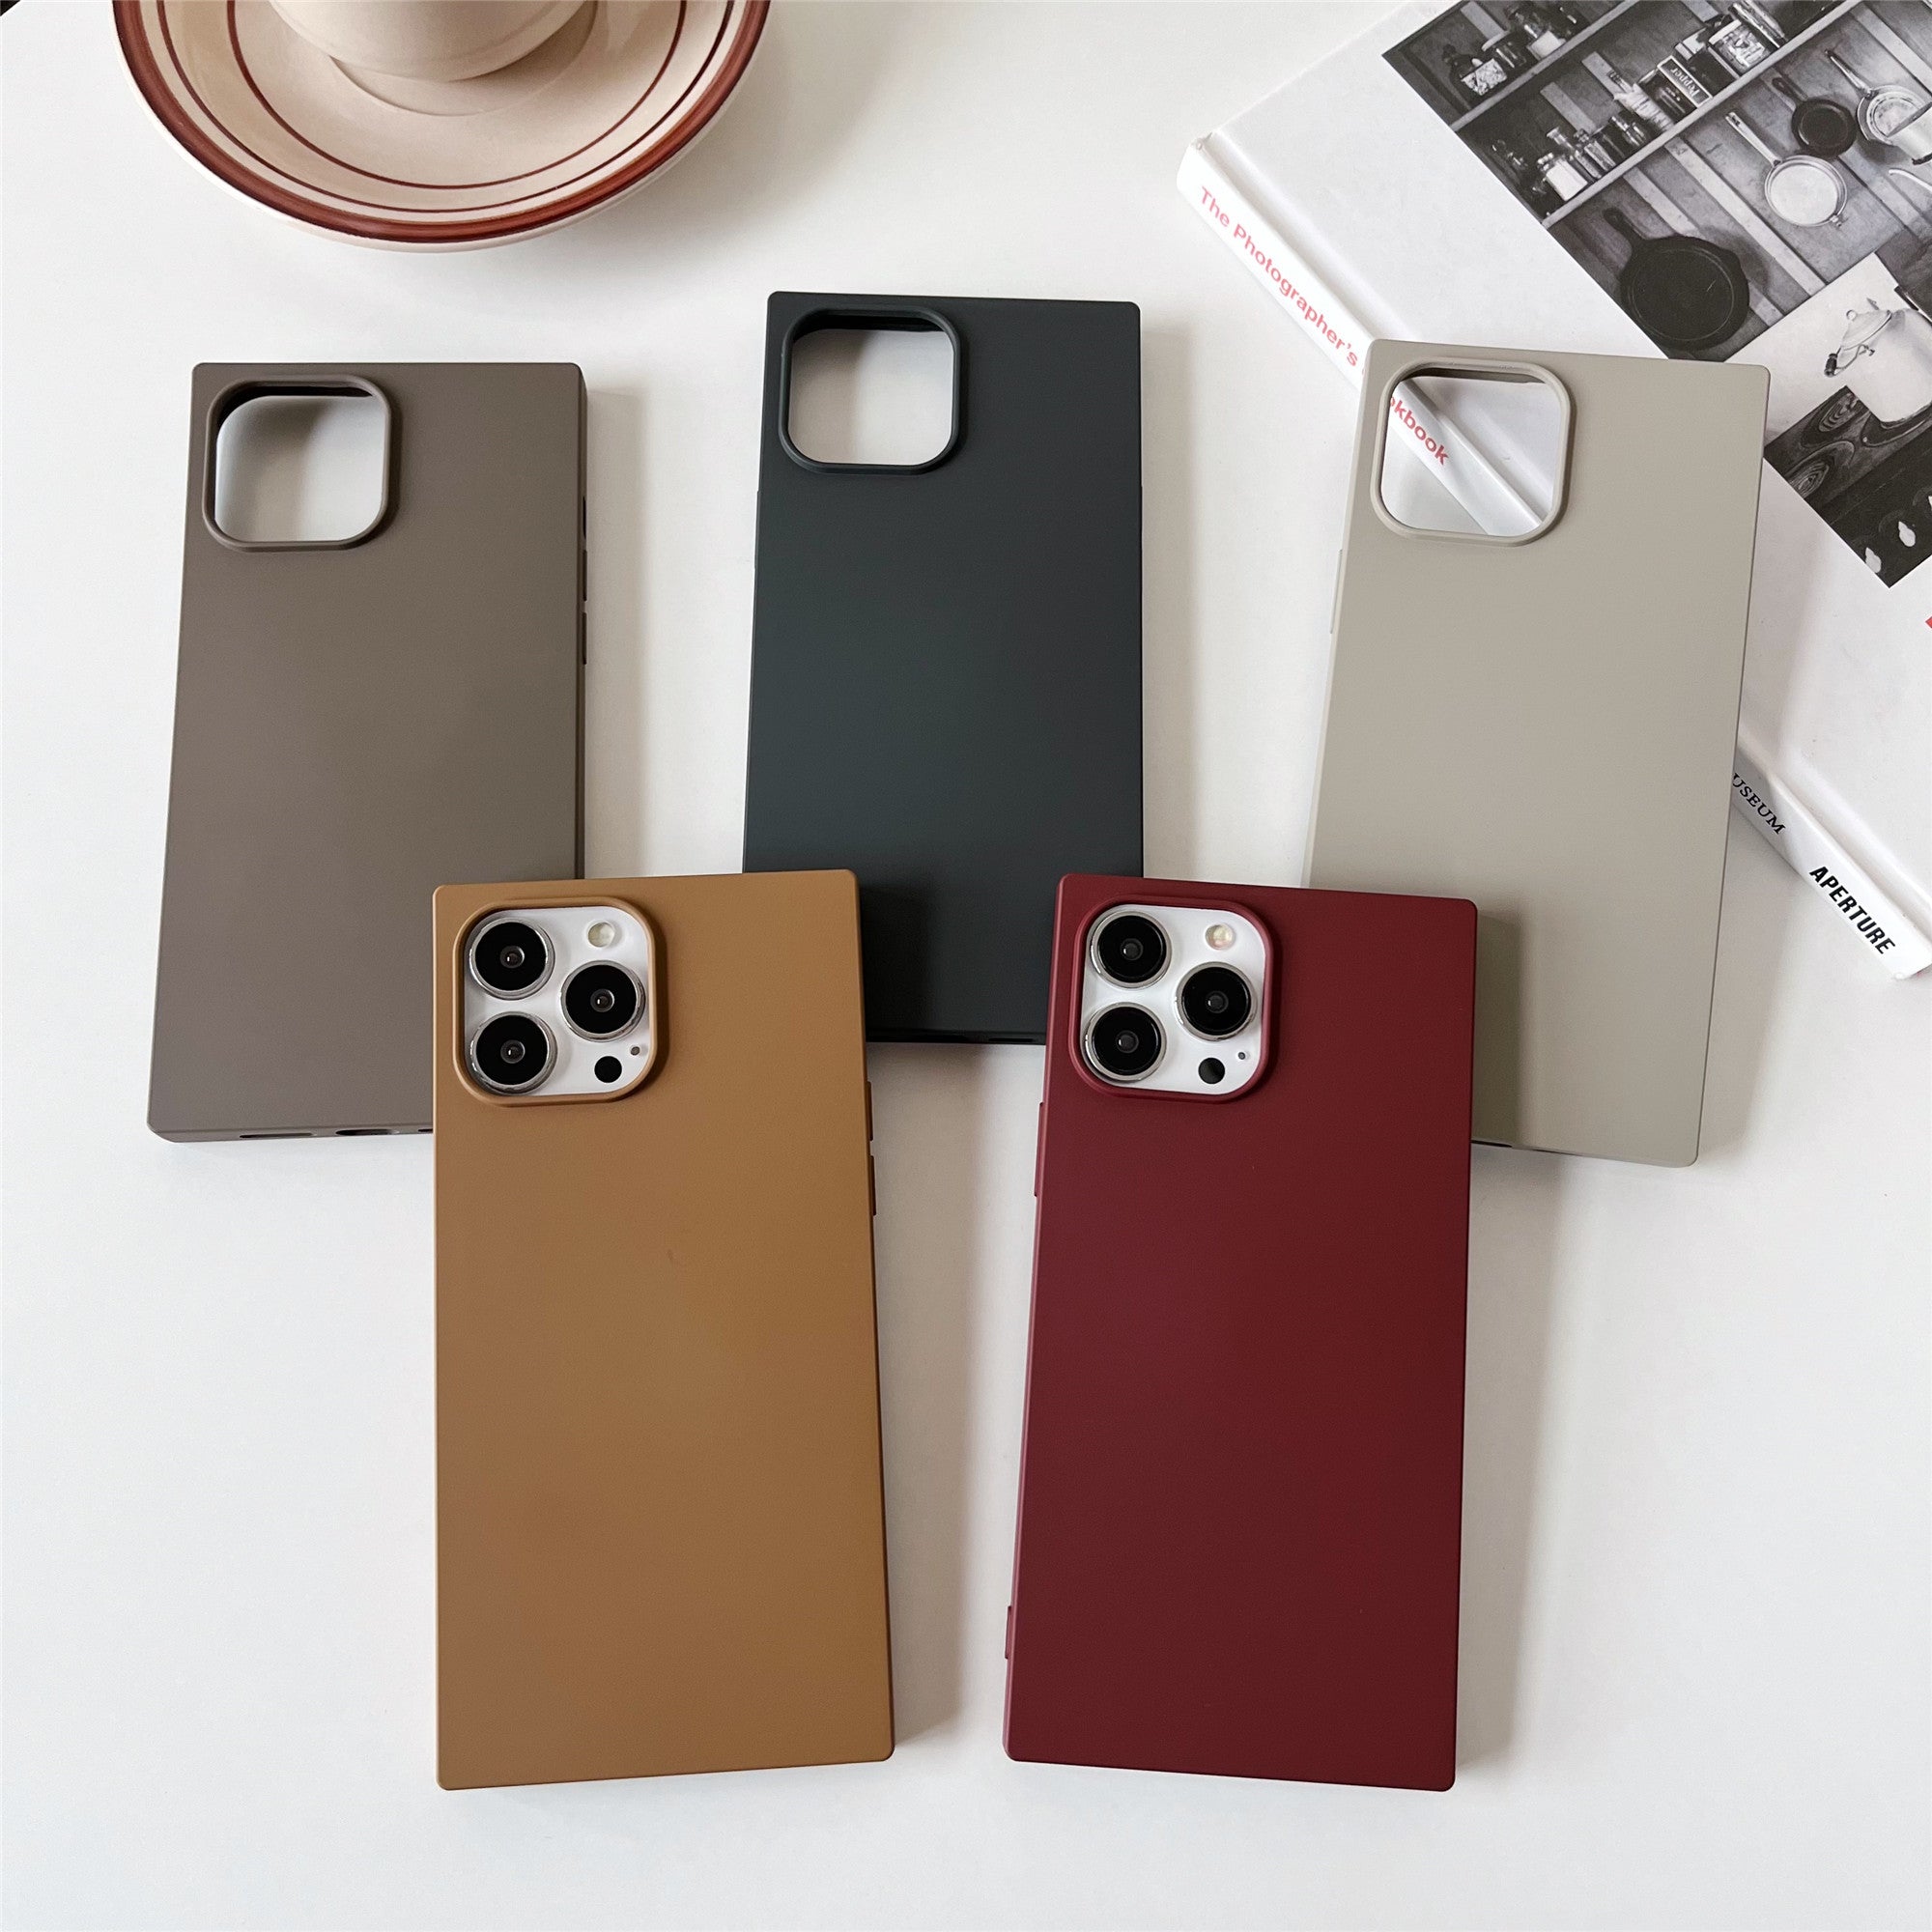 iPhone 11 Case Square Silicone Neutral Color (Golden Brown)